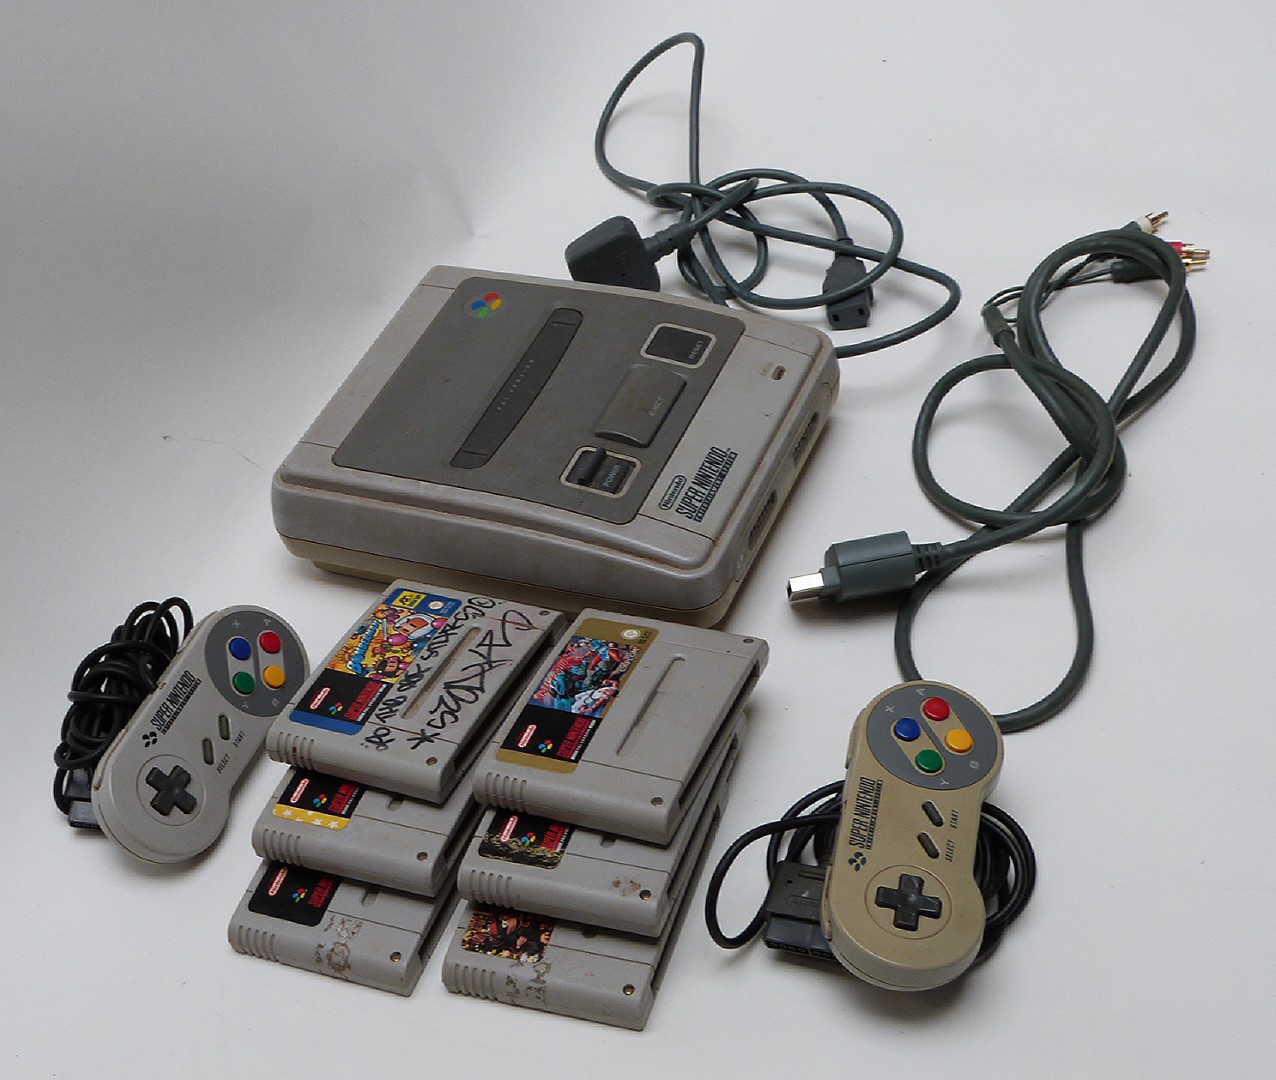 Super Nintendo Entertainment System (SNES) video games console with two controllers and six games. - Image 2 of 2